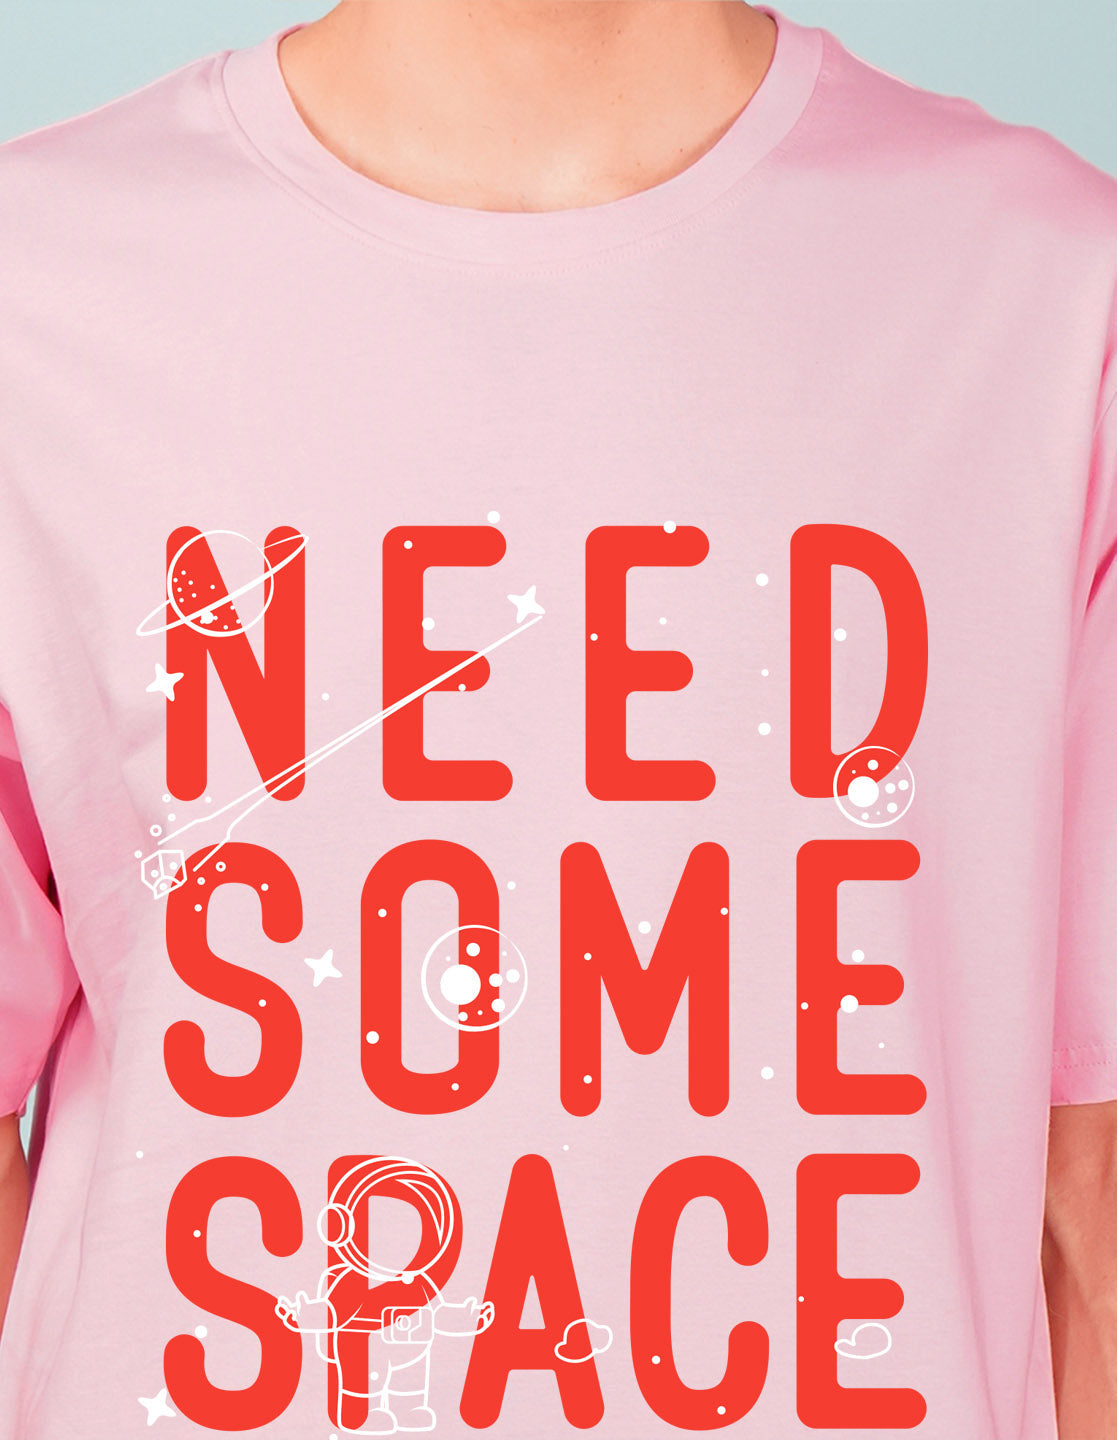 Nusyl Light Pink Need some space Printed oversized t-shirt